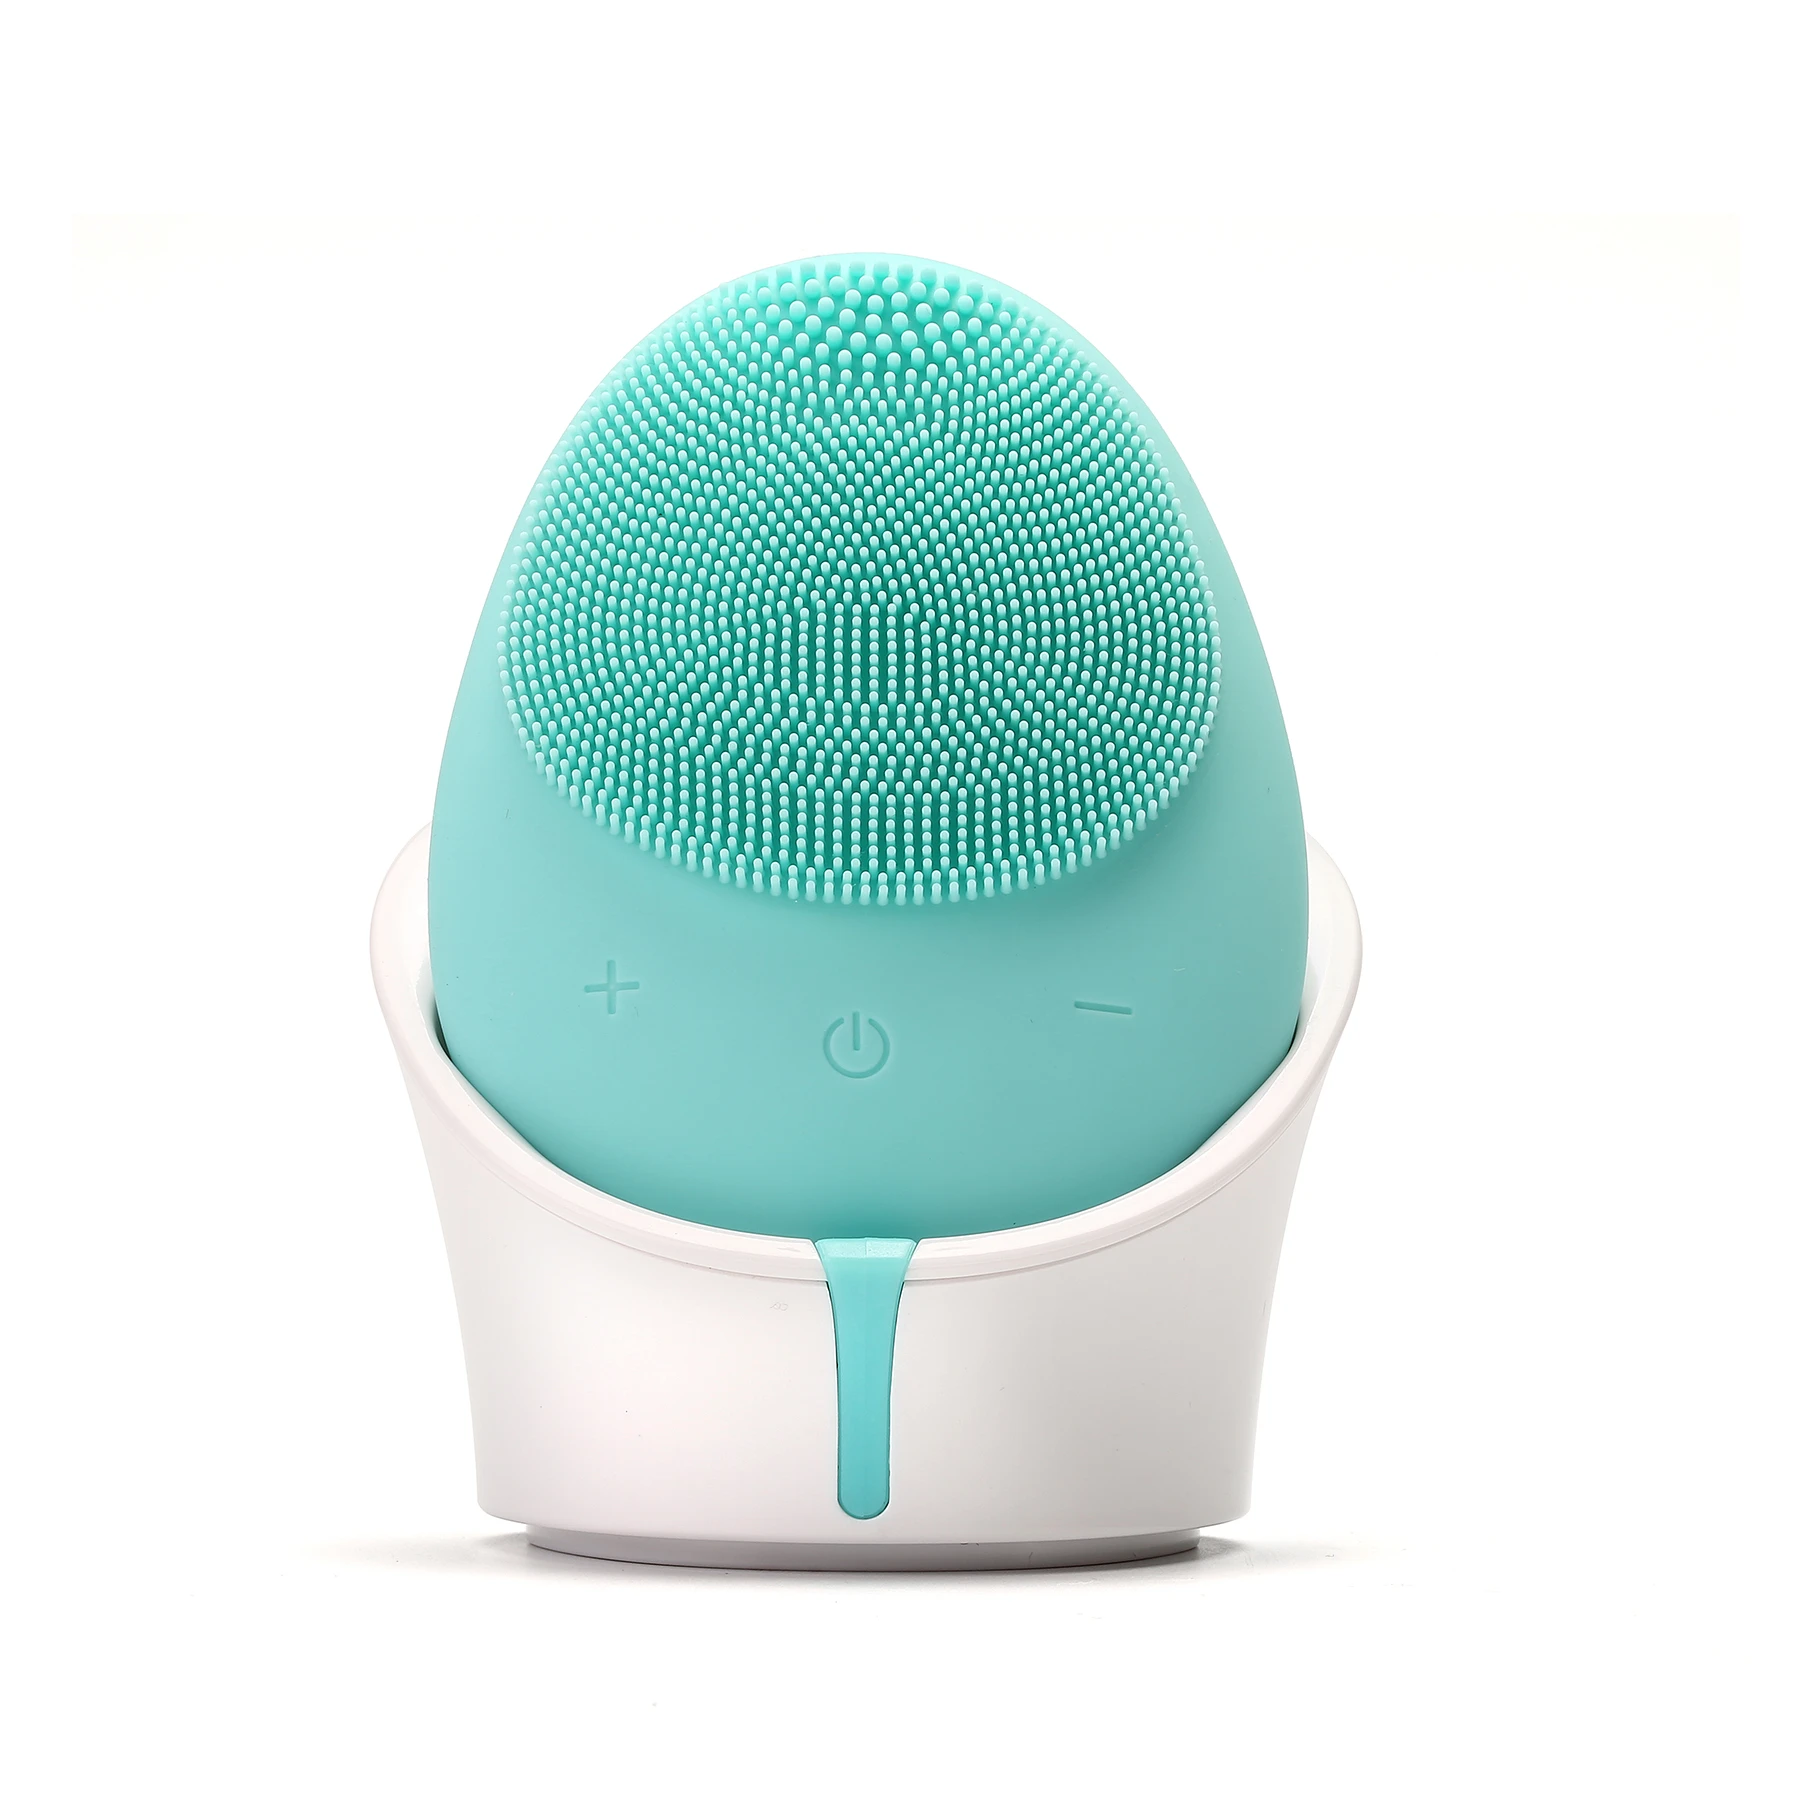 New Product Ideas Cosmetic Dirt Remover Sonic Pore Cleaner Silicone Face Brush Cutest Egg Shaped Facial Exfoliating Brush